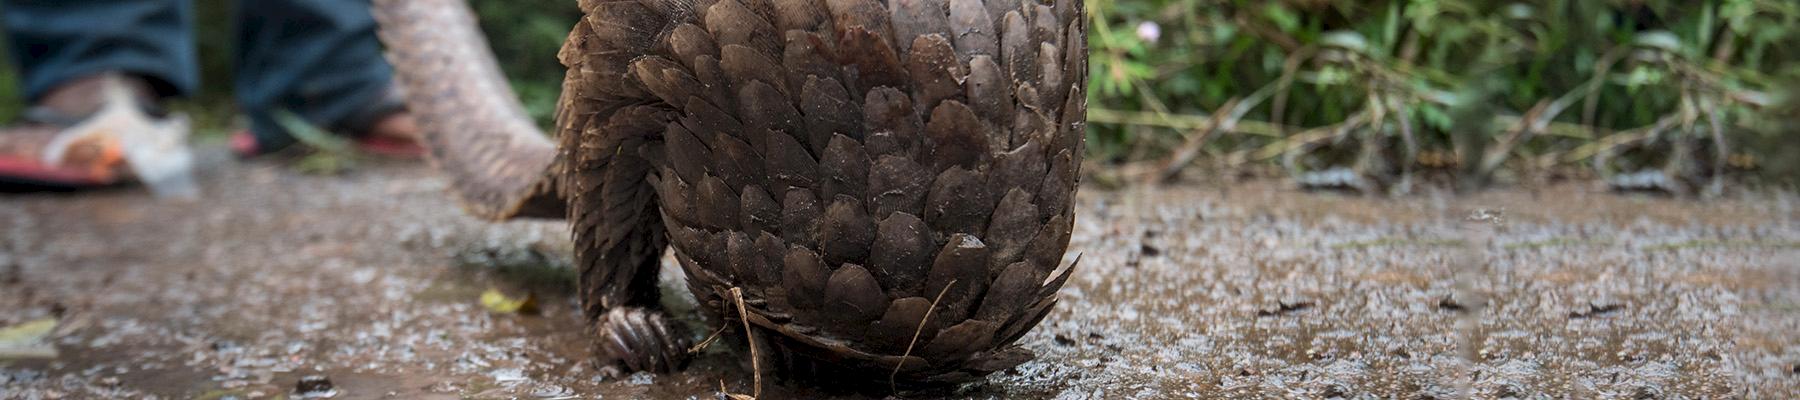 A live pangolin for sale in a market near Douala, Cameroon. Photo: TRAFFIC / A. Walmsley